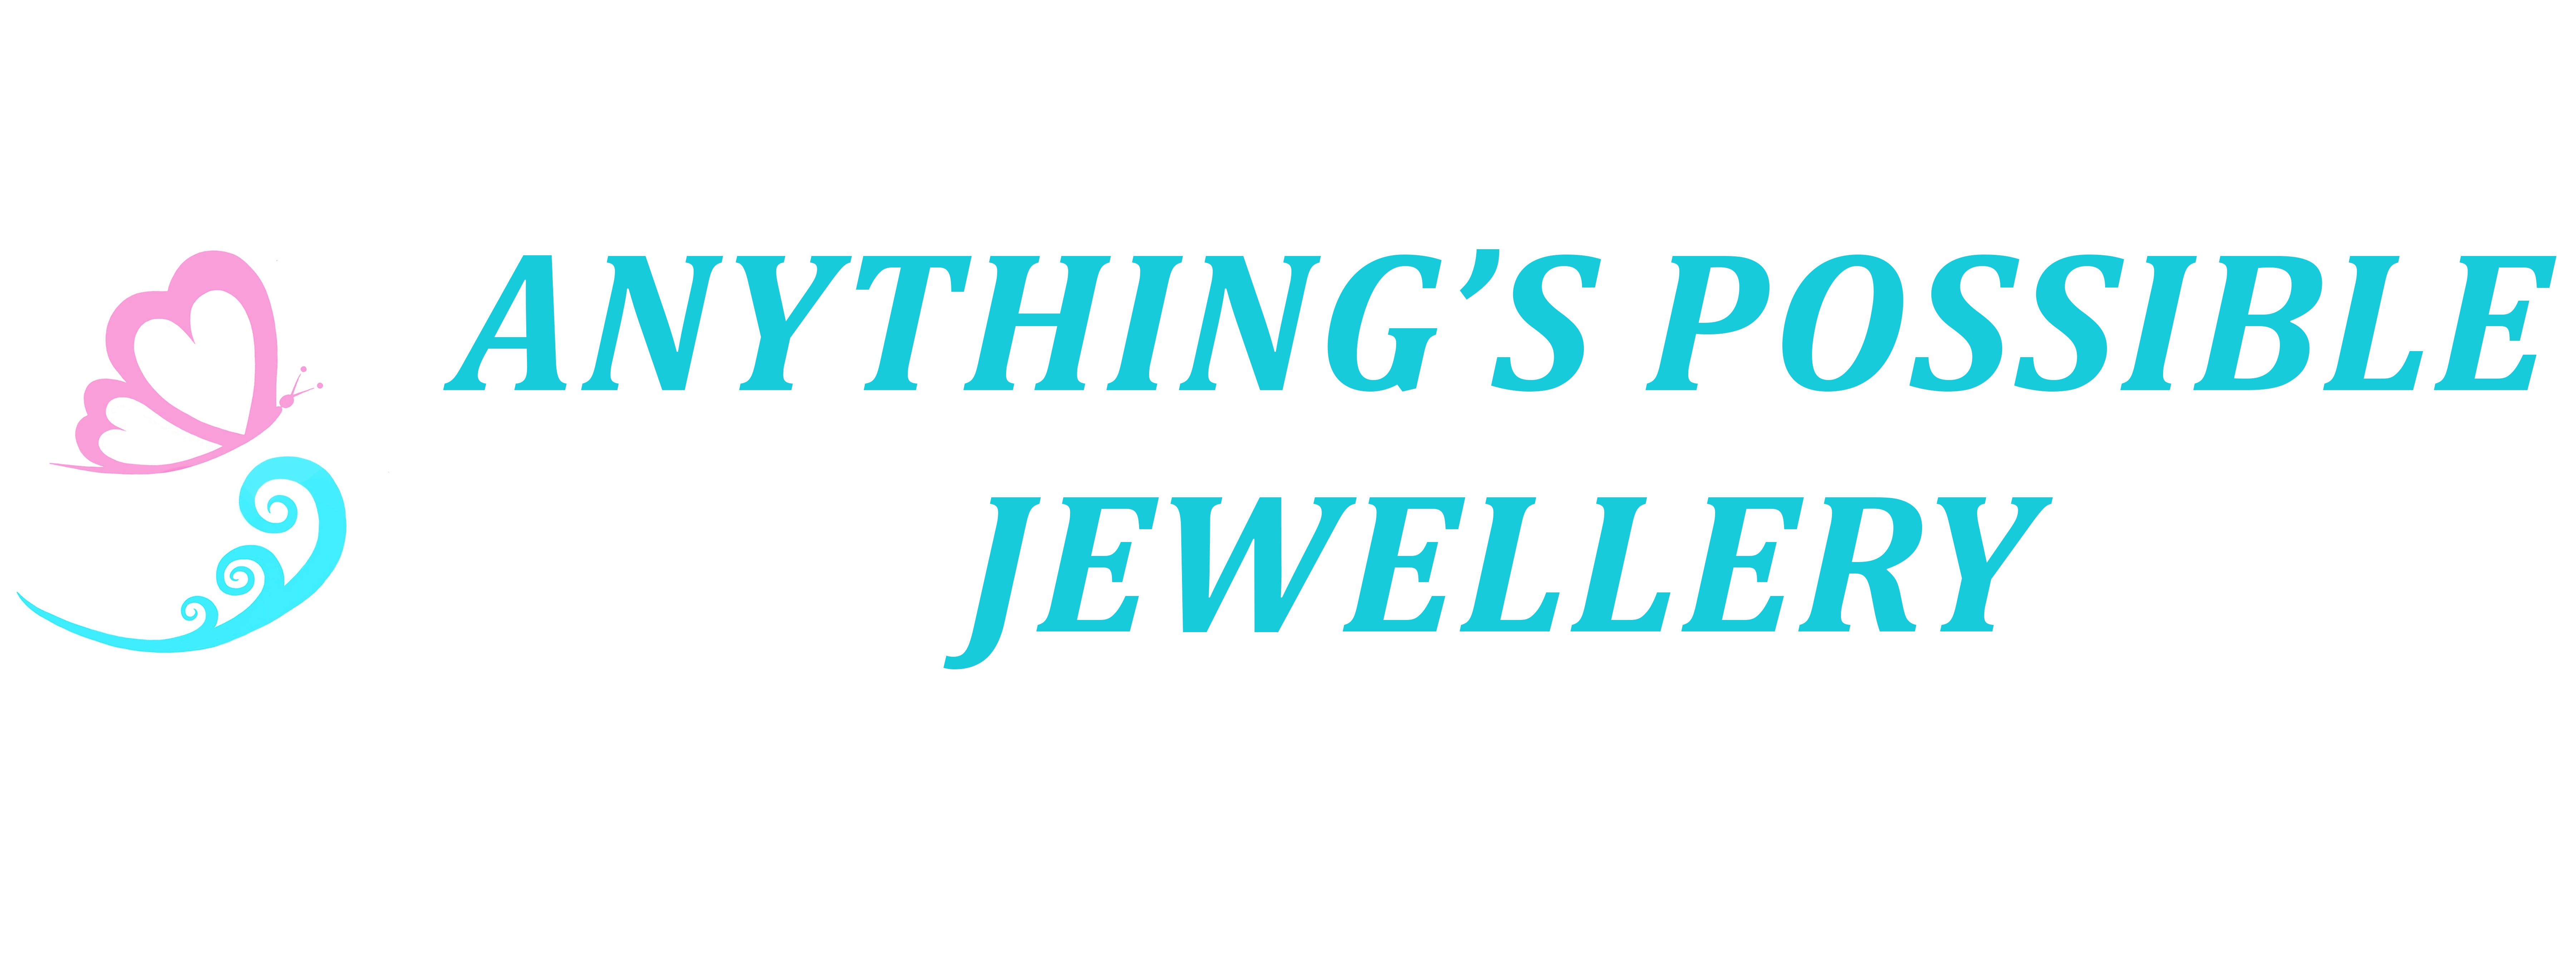 Anything's Possible Jewellery